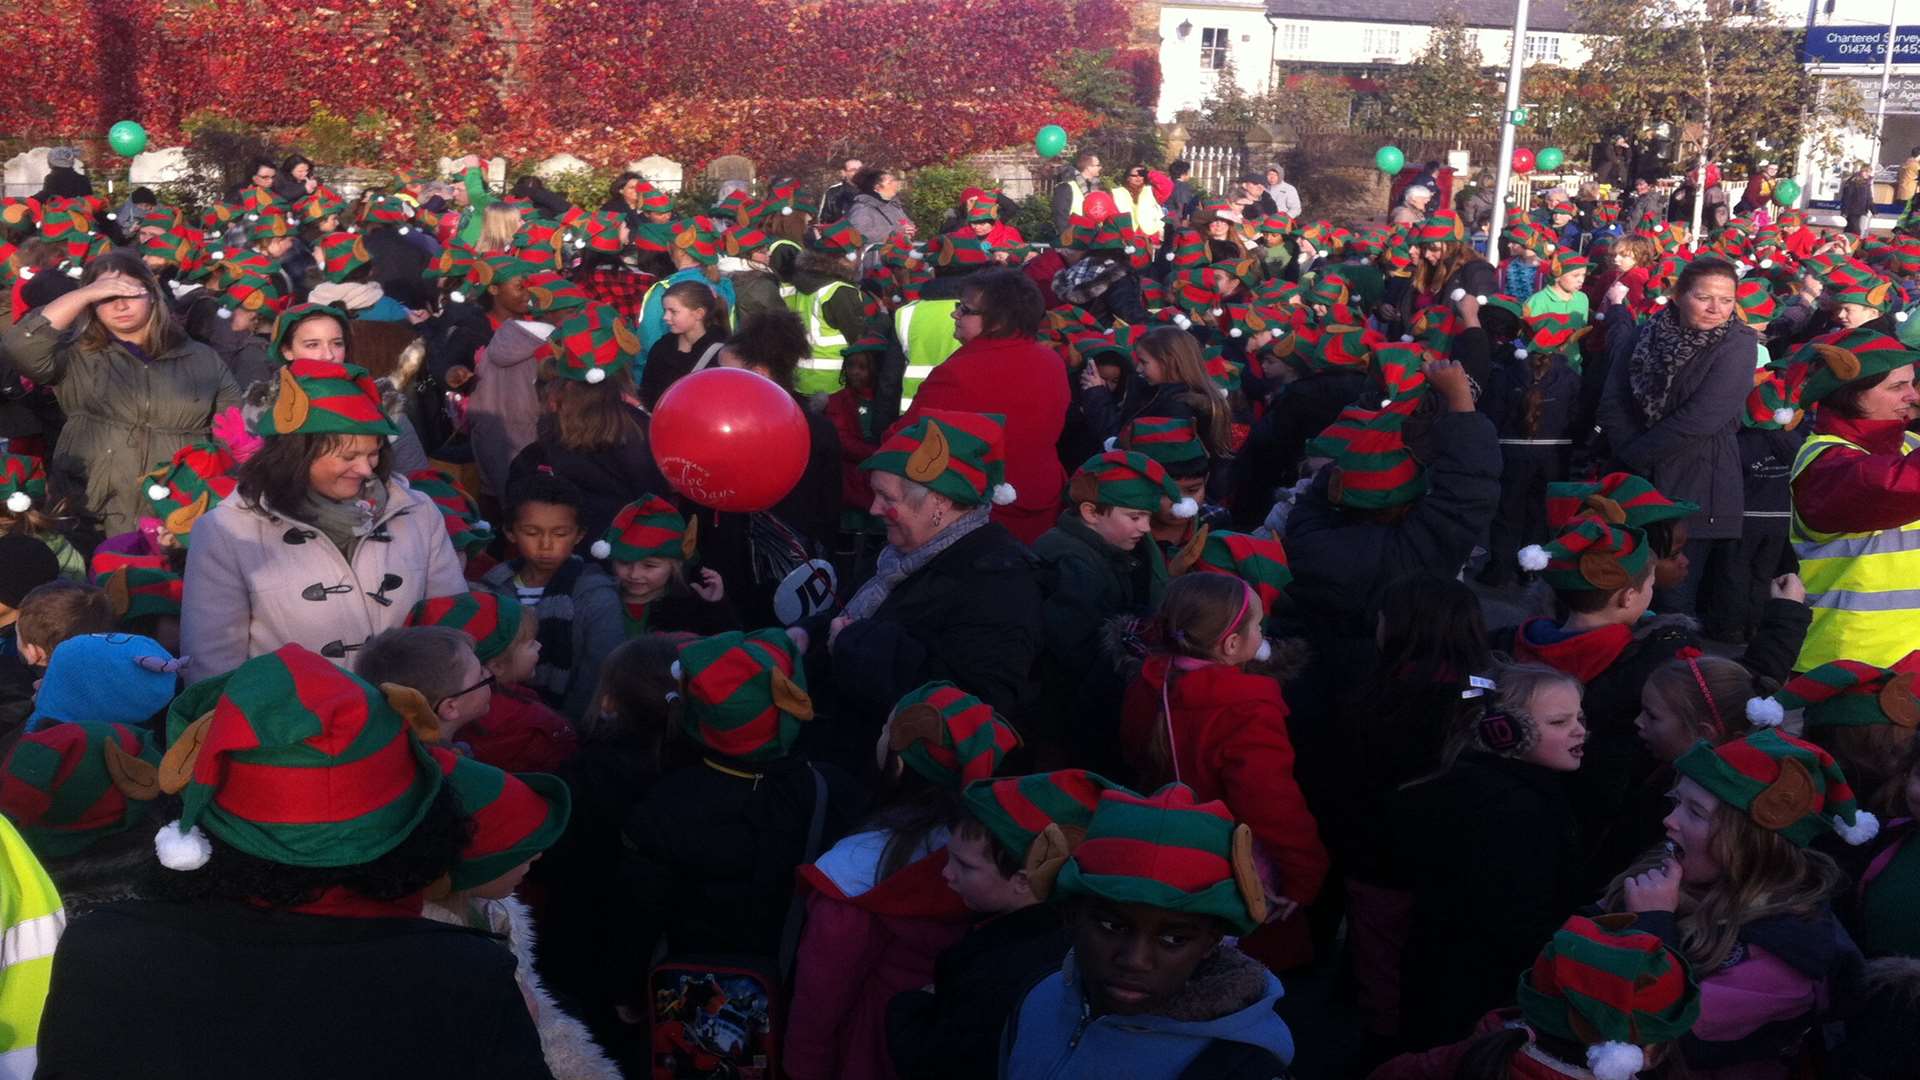 More than 900 people dressed as elves in Gravesend helped beat a world record